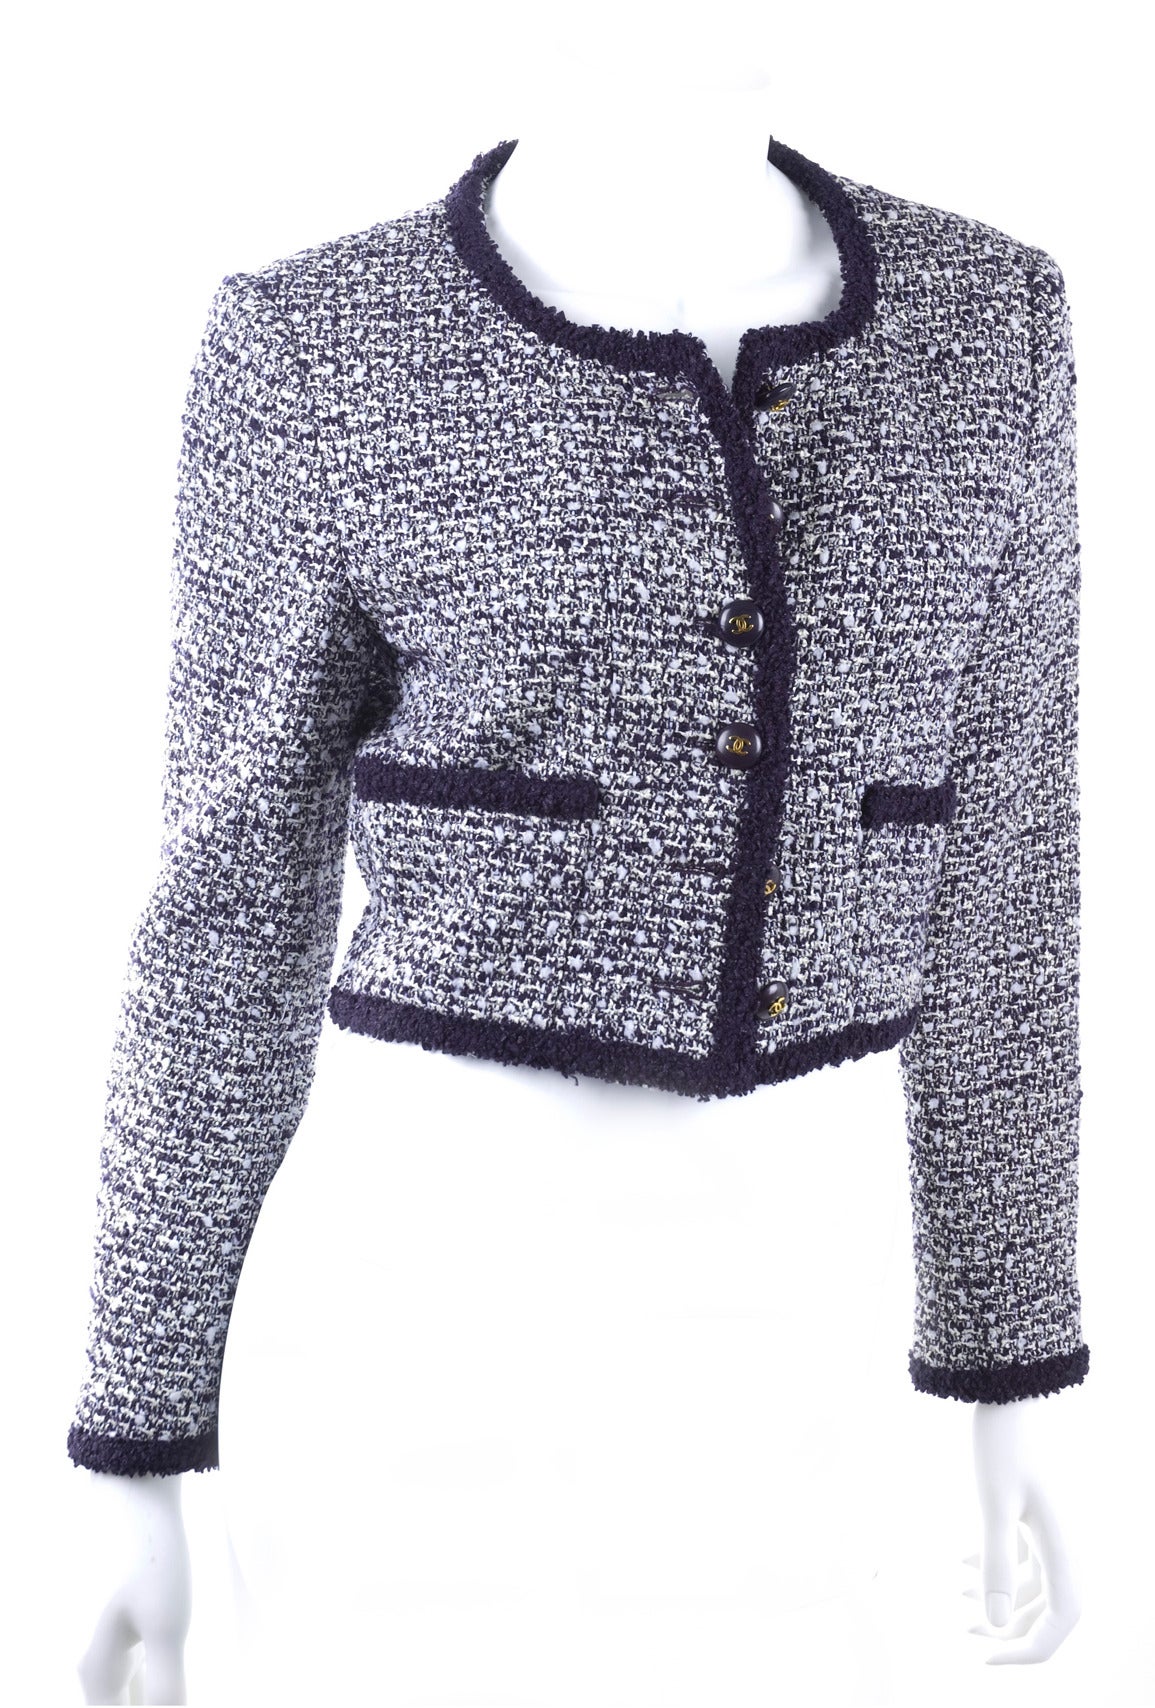 Chanel Cropped Jacket in Navy and Creme.
Size EU 36
Measurements:  coming soon
Length